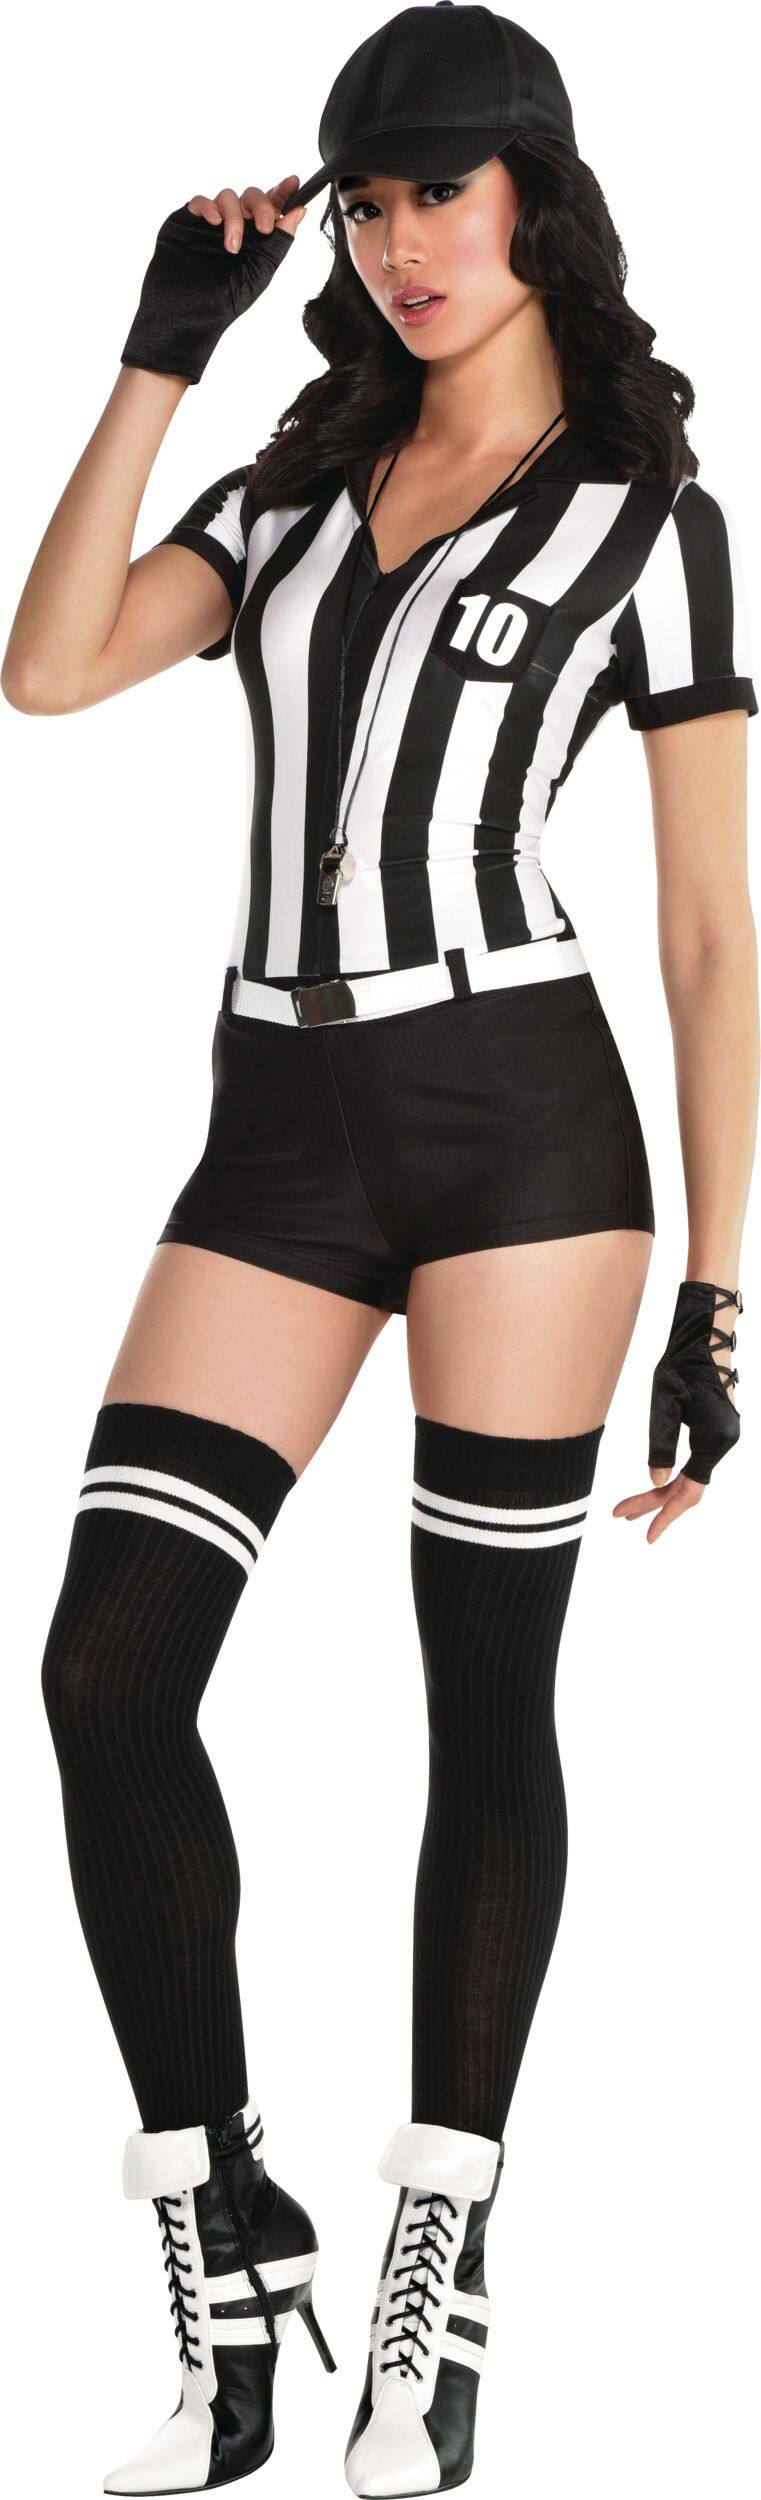 Womens Referee Blackwhite Striped Romper With Hat And Whistle Halloween Costume Assorted Sizes 